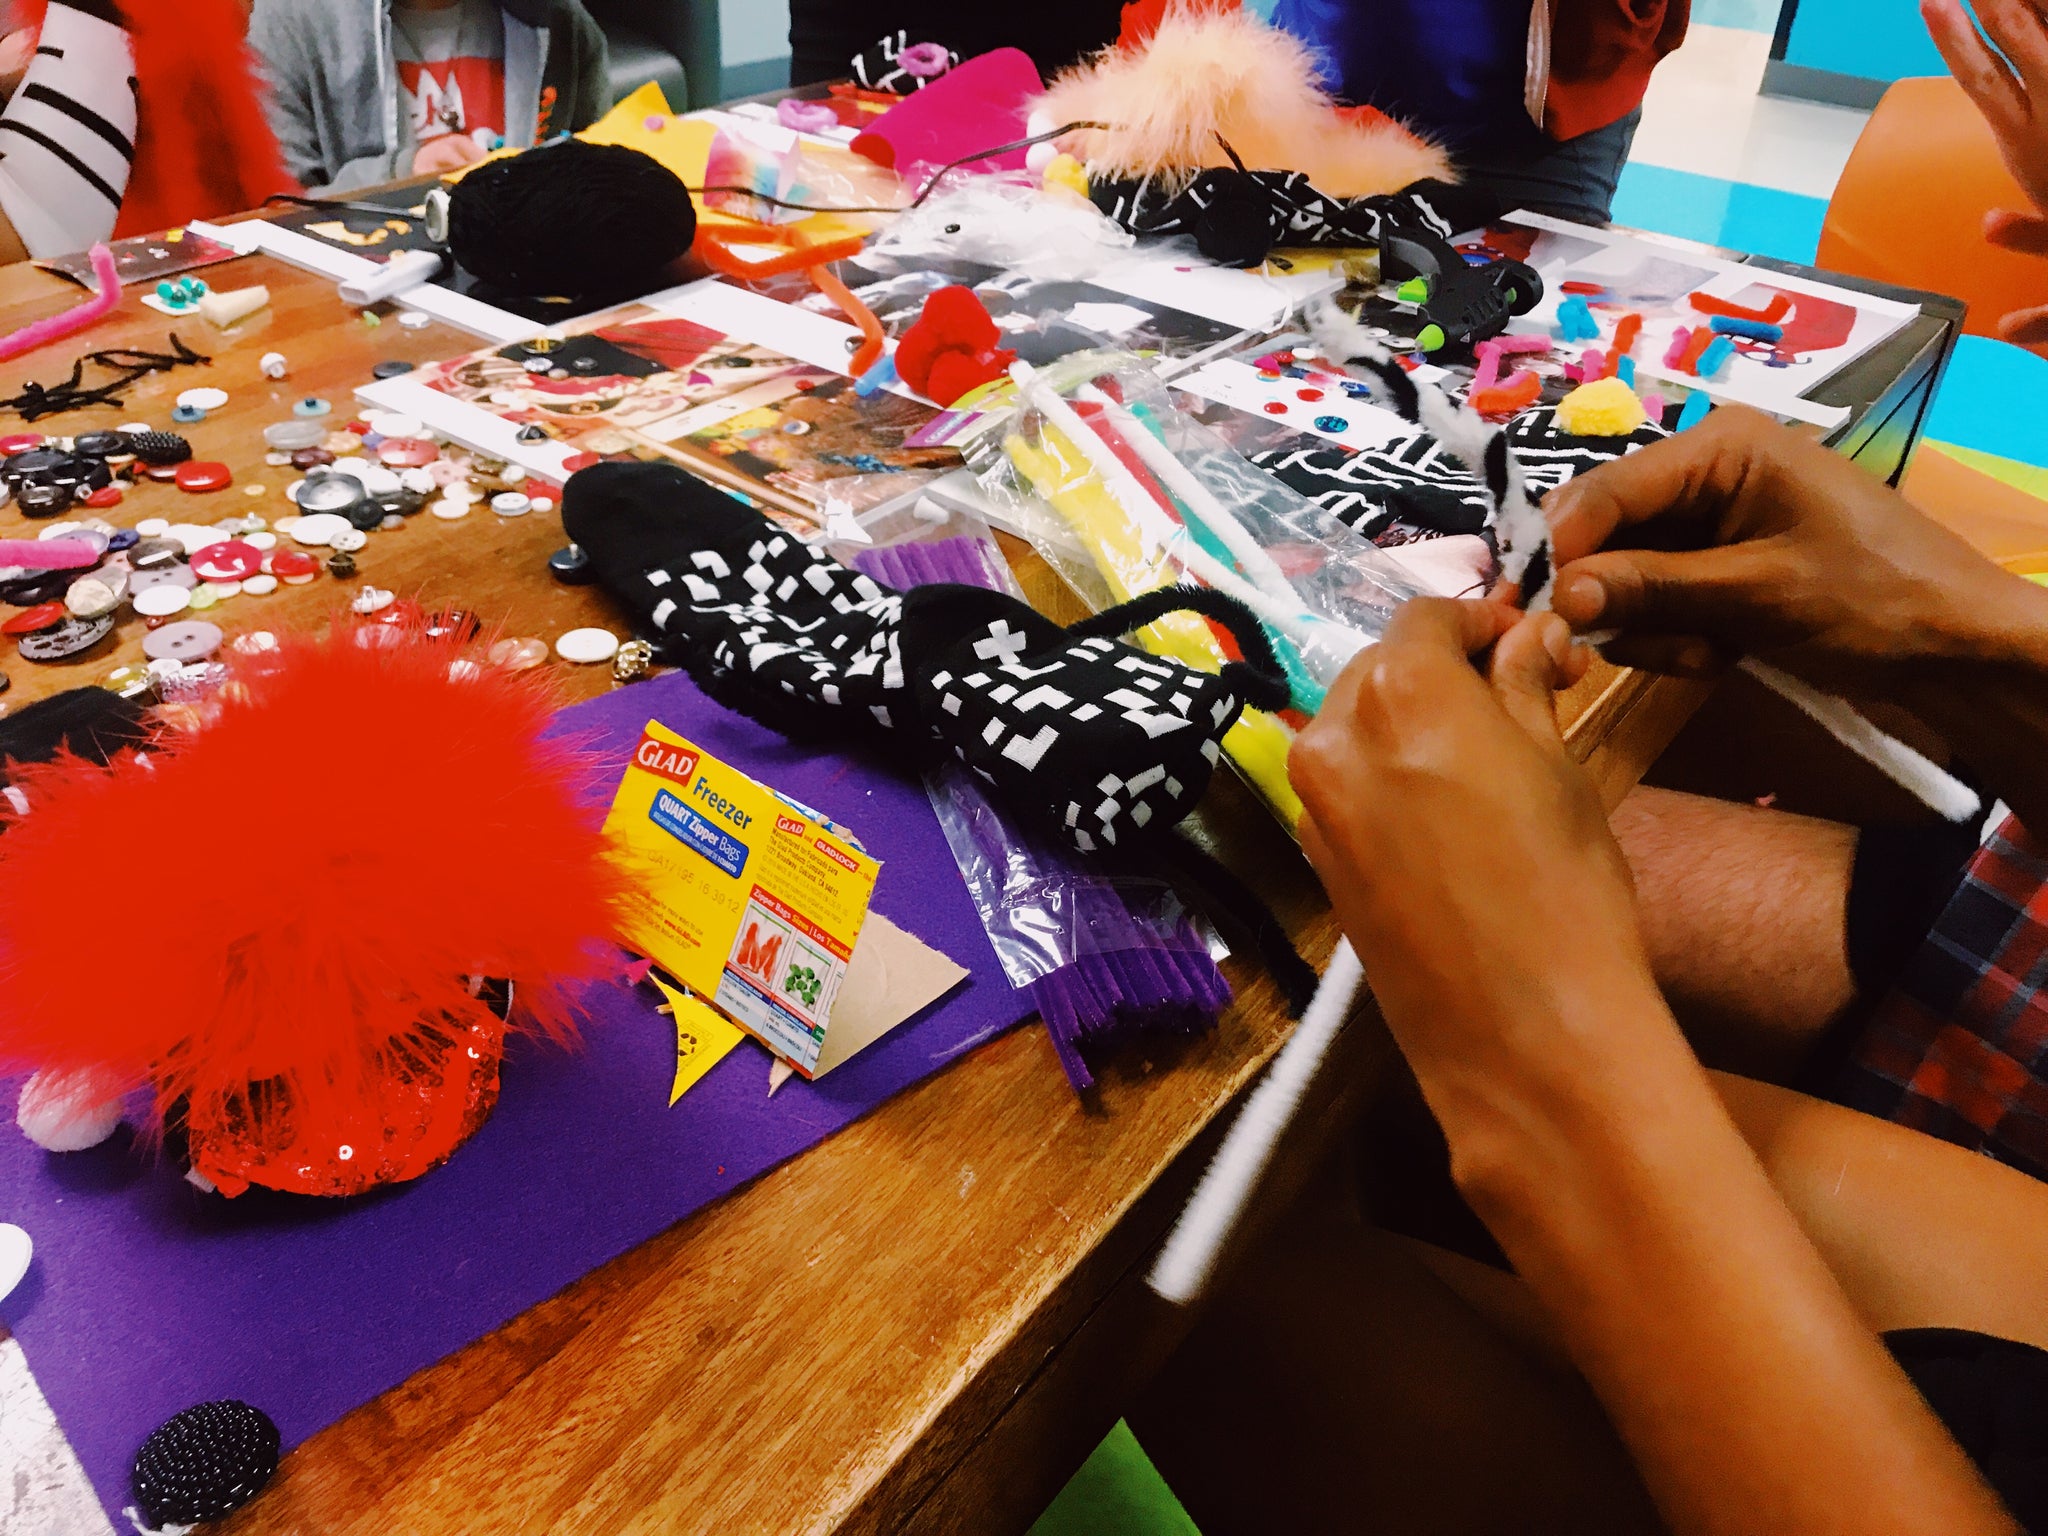 A Queer Sock Puppet Workshop at the Los Angeles LGBT Center